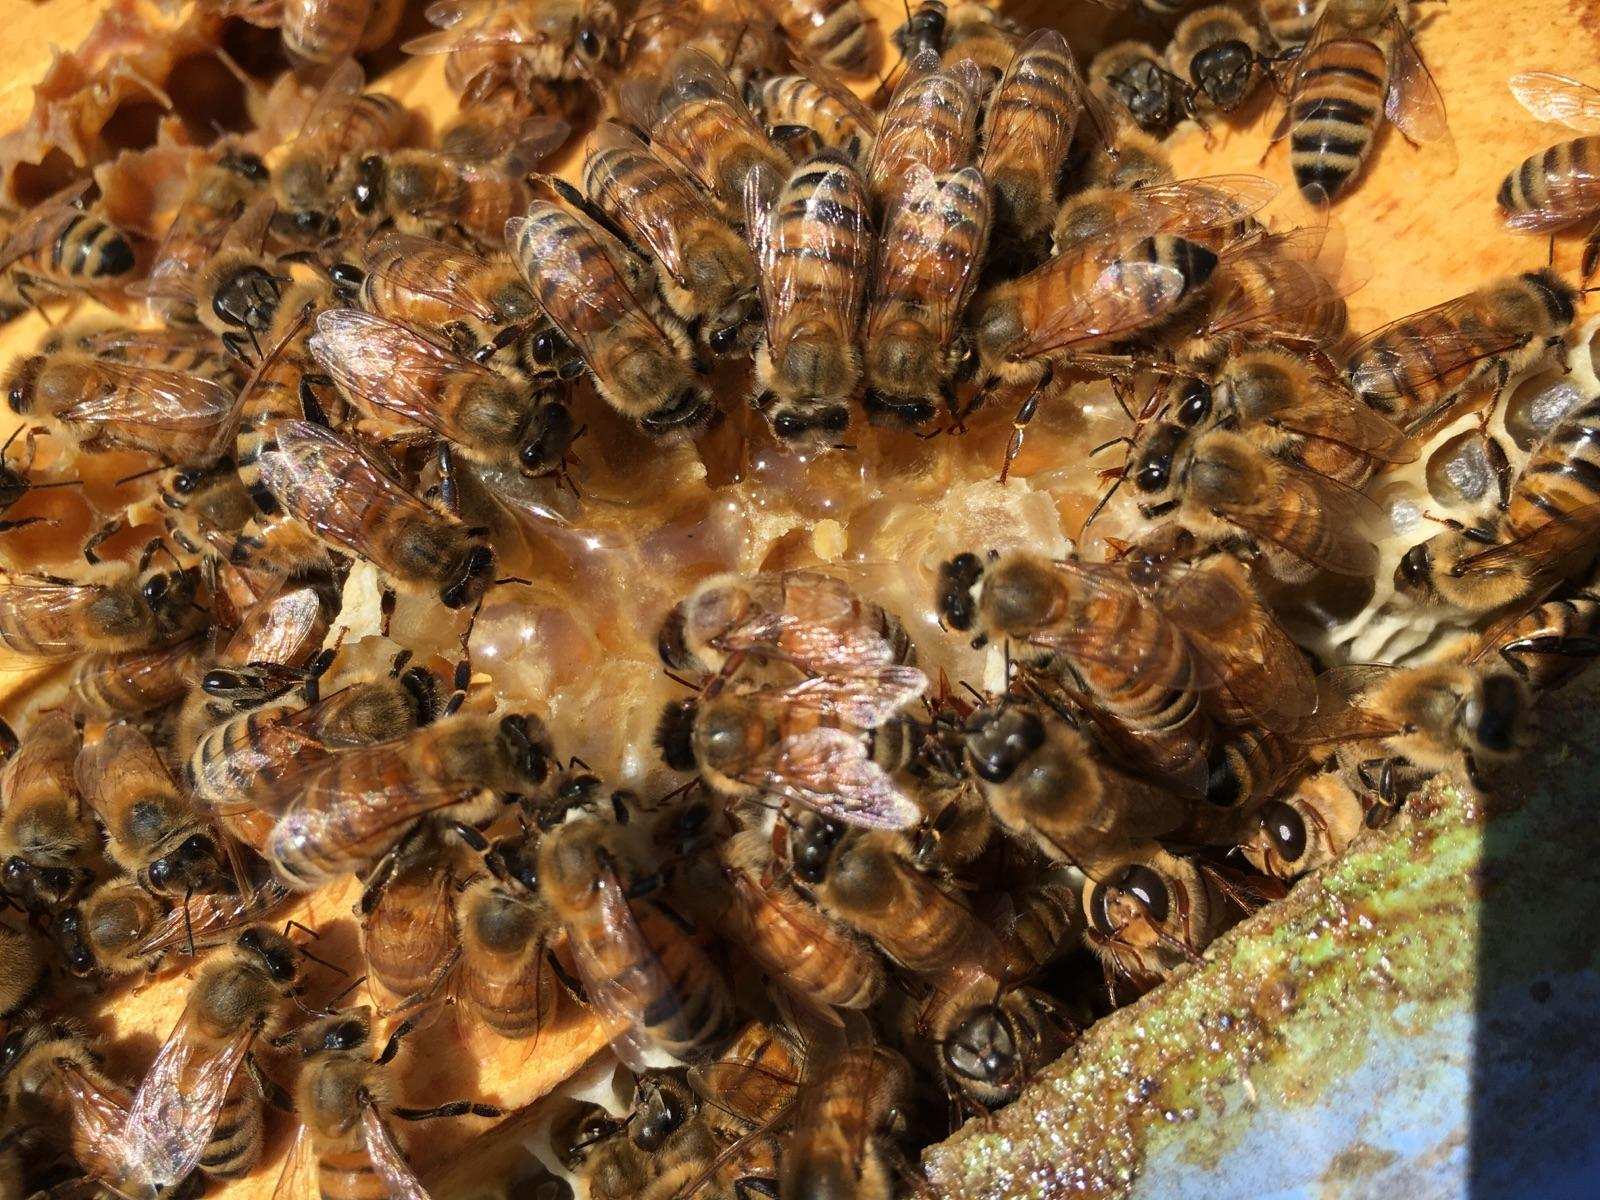 bees drinking nectar in hive